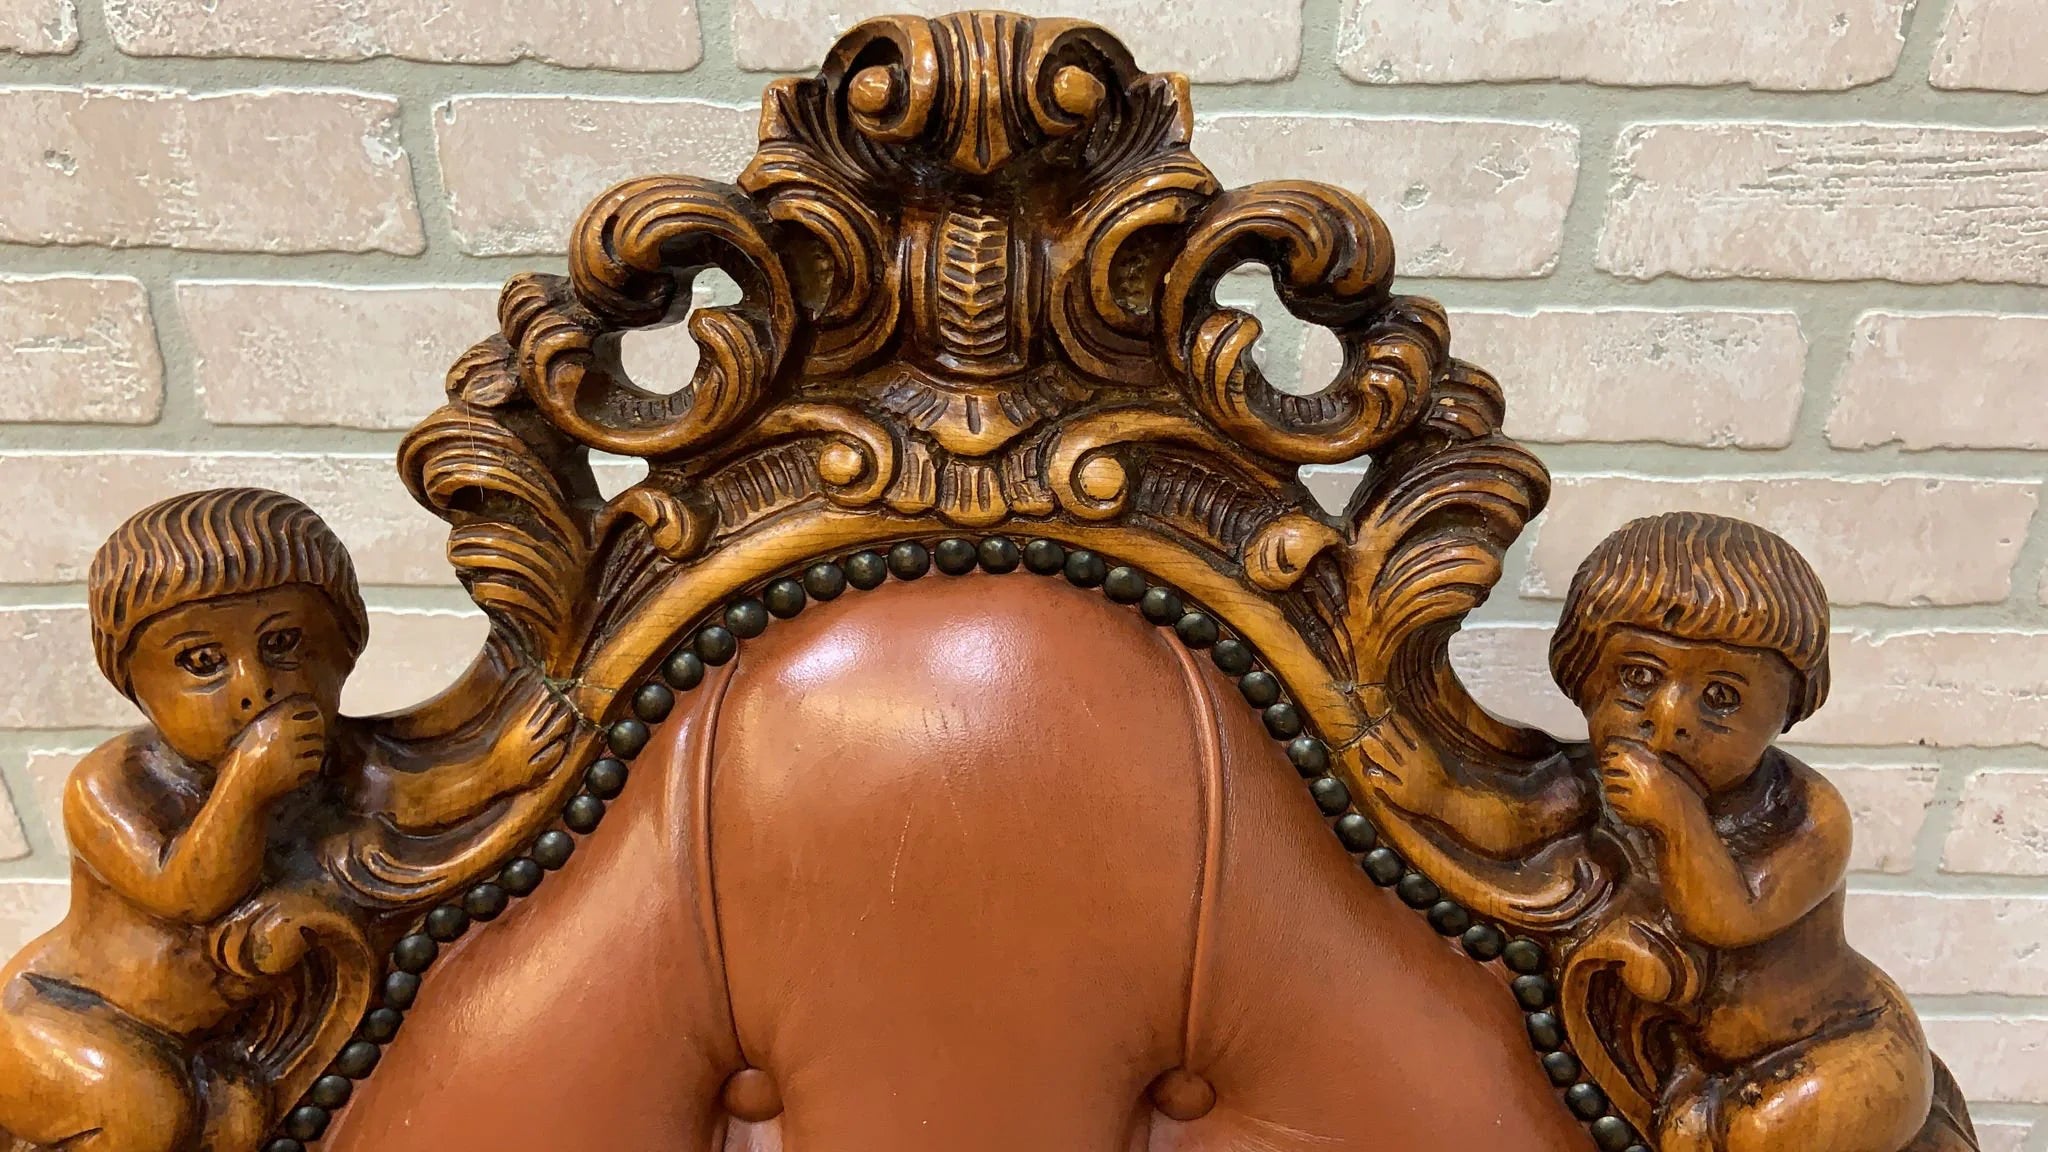 Antique Italian Rococo Style Heavily Carved Ornate Figural Tufted Dining Chairs in a Original Brown Leather - Set of 4